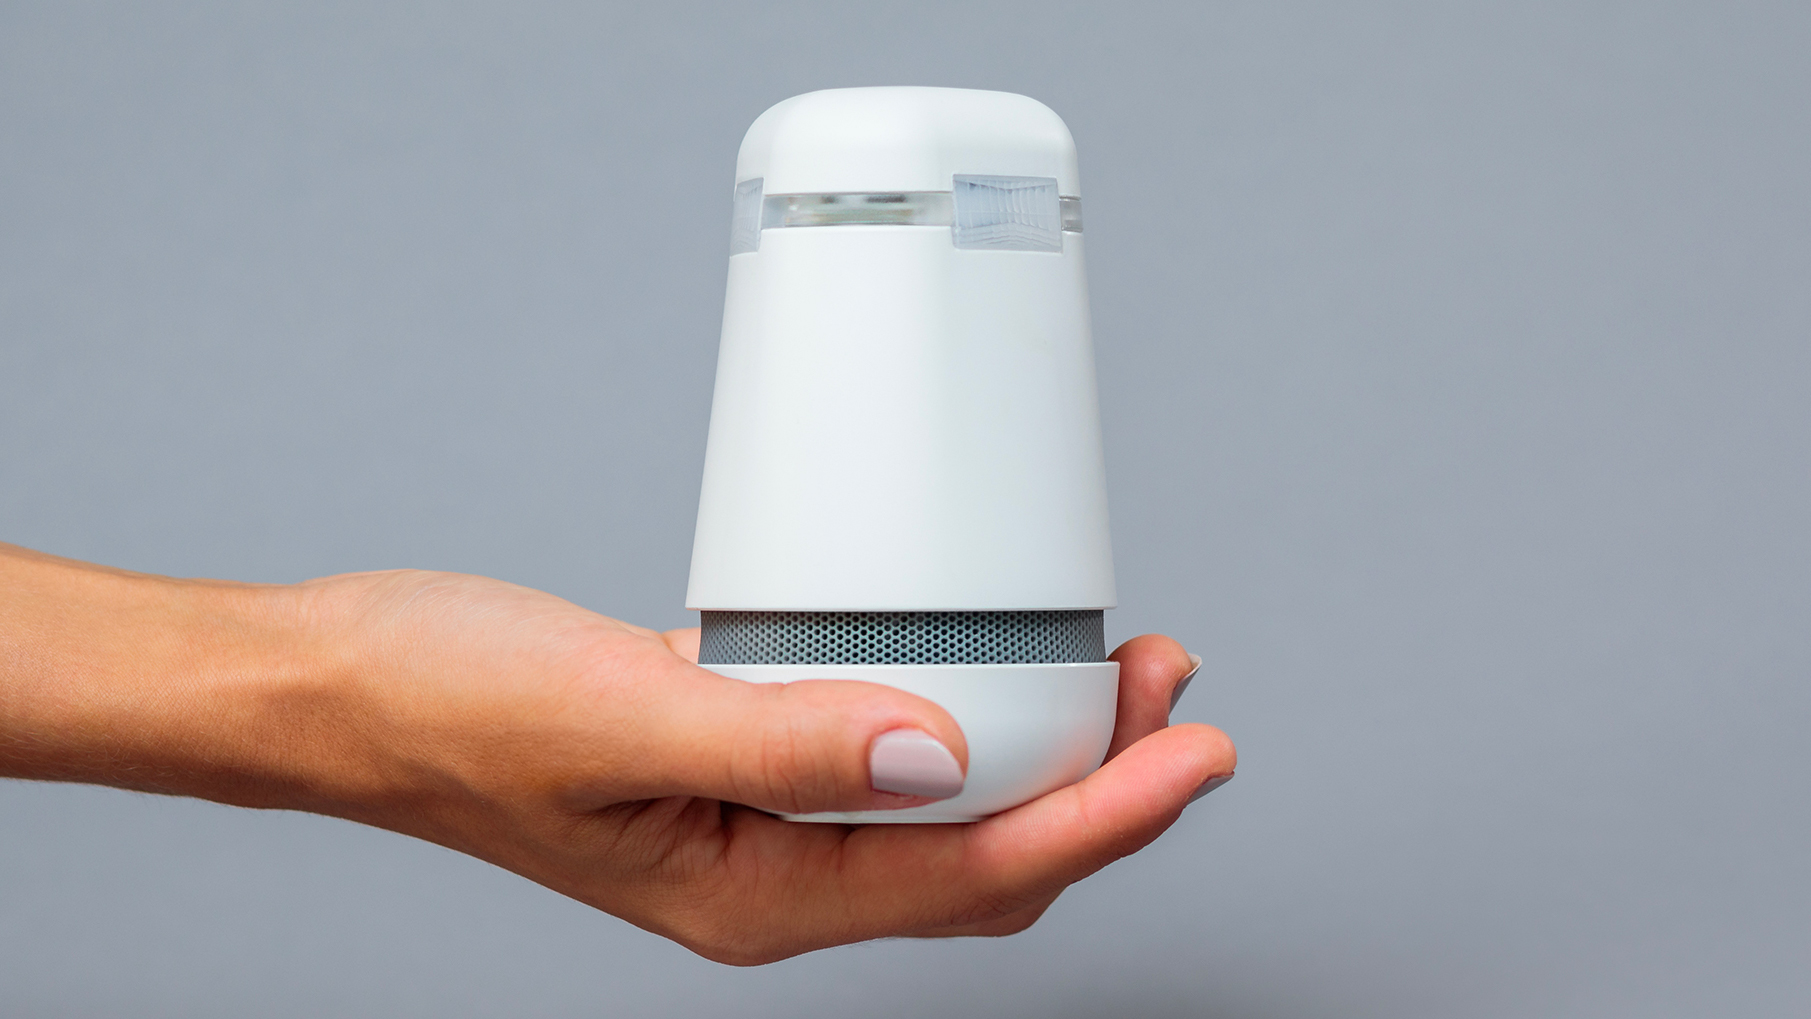 This Portable Security Device Is No Bigger Than a Coffee Cup But Can Feel When a Window Breaks